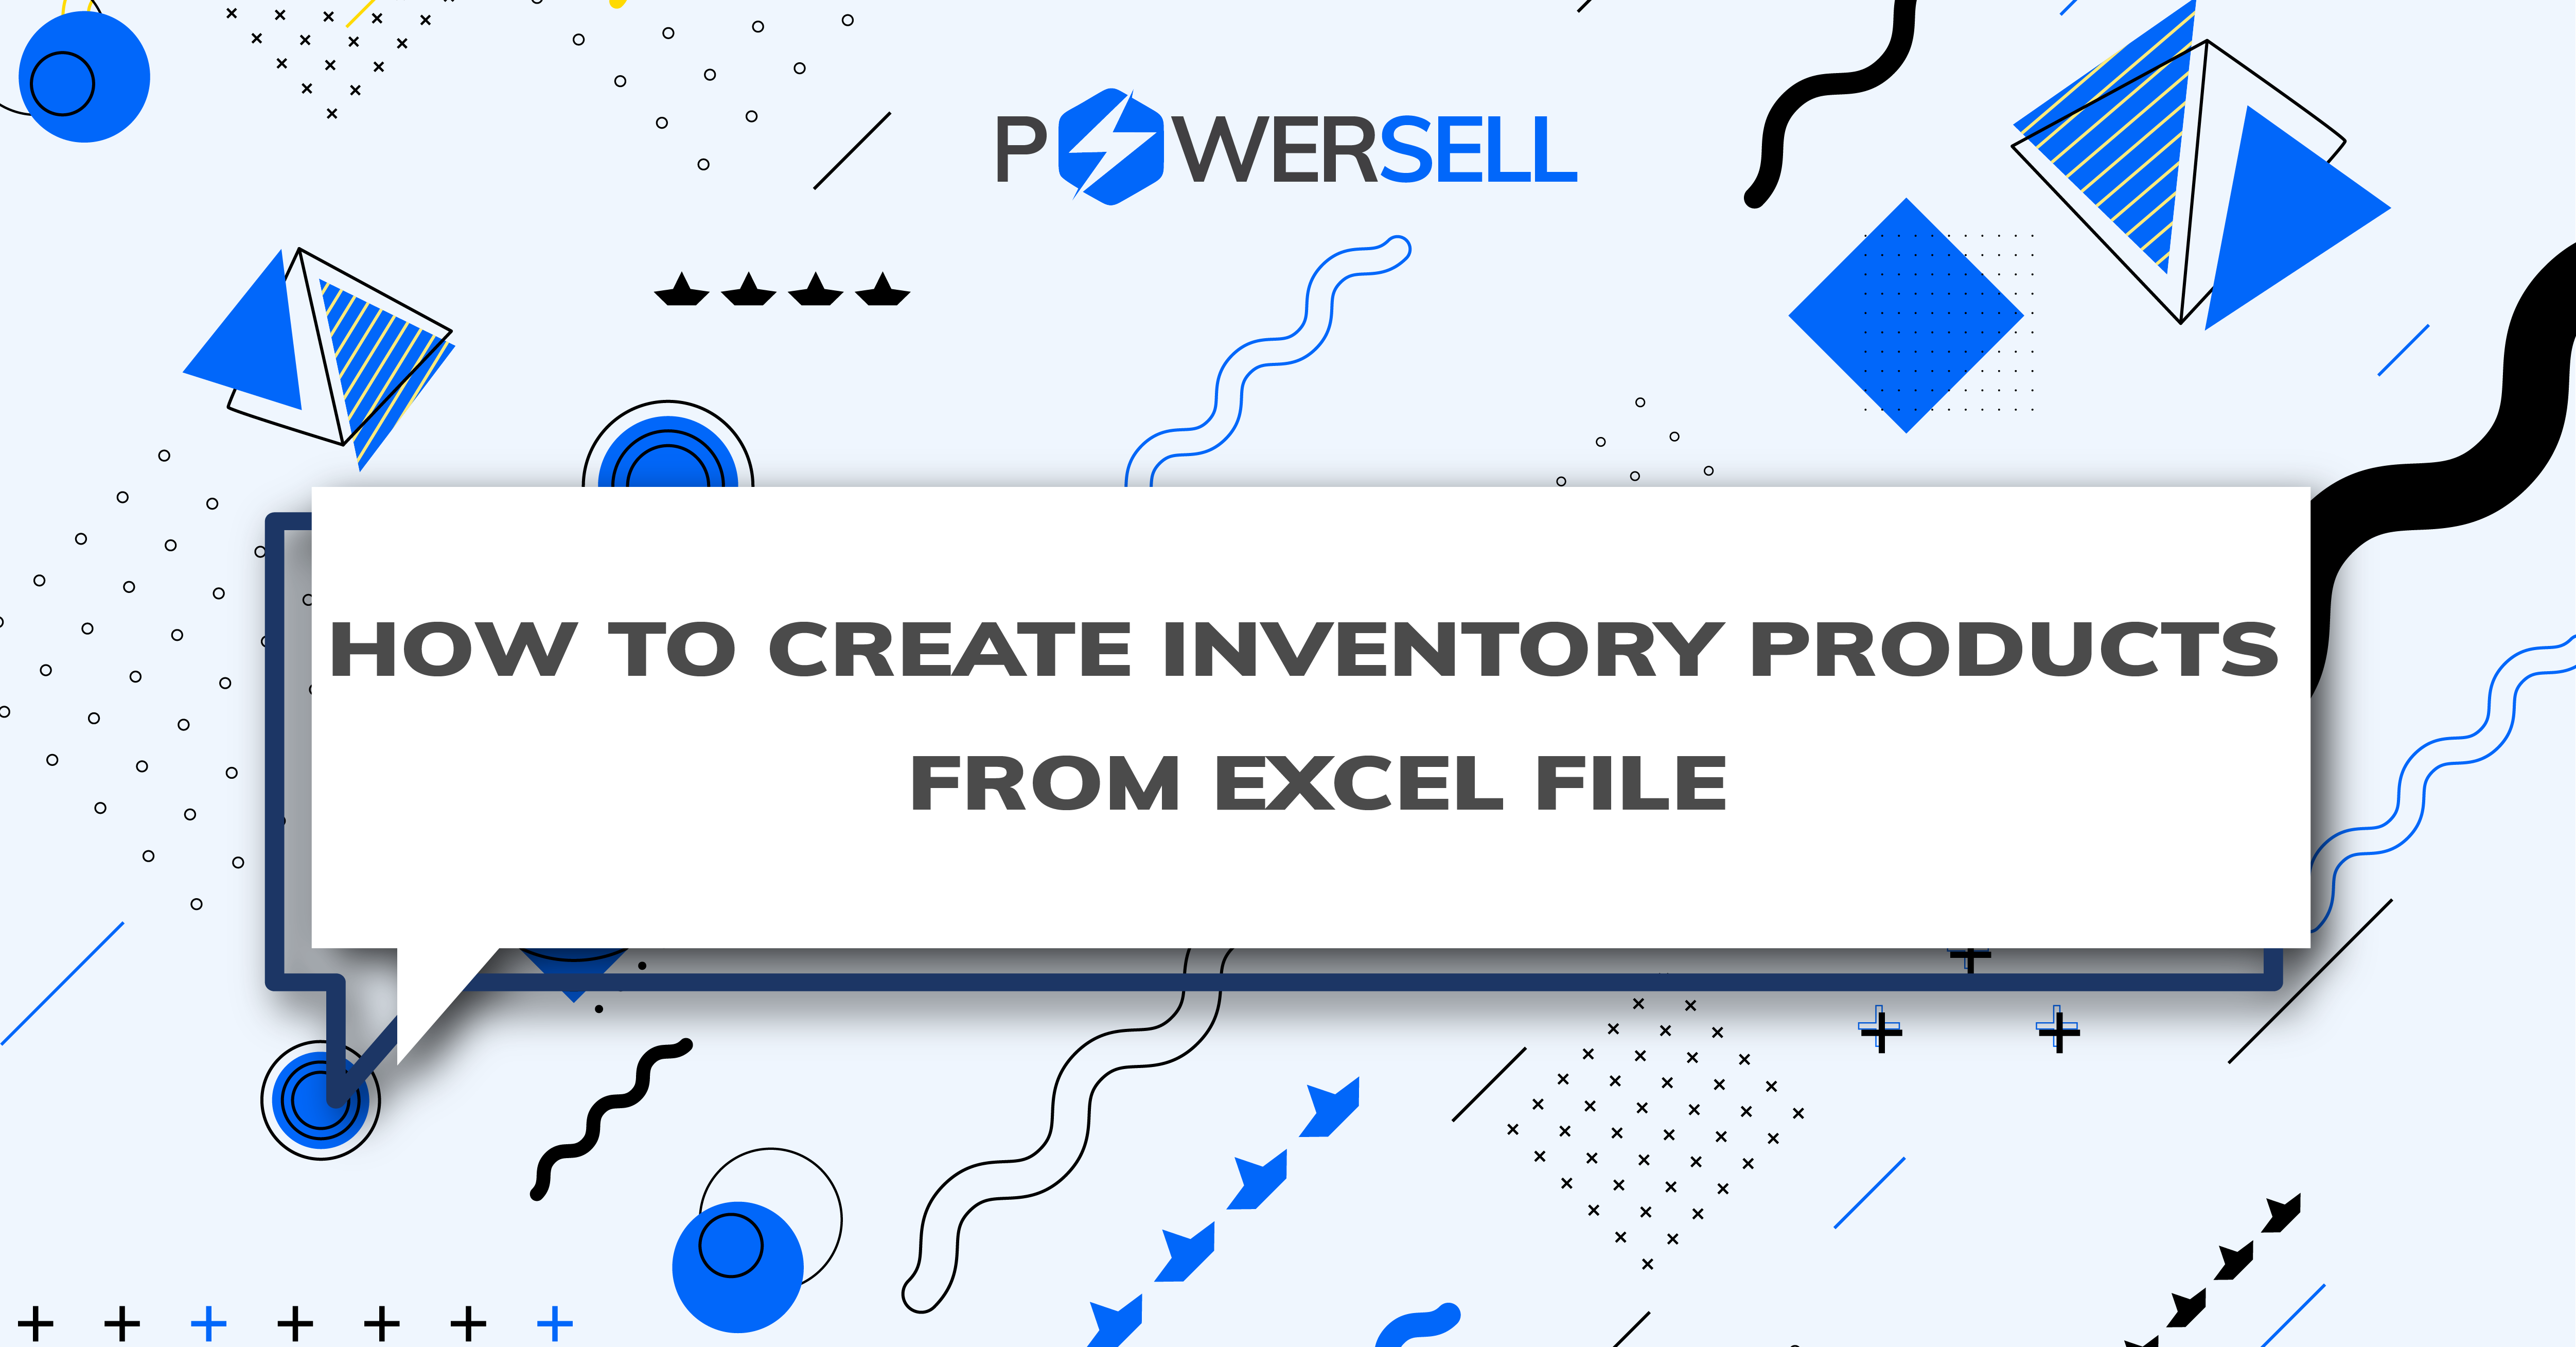 HOW TO CREATE INVENTORY PRODUCTS FROM EXCEL FILE